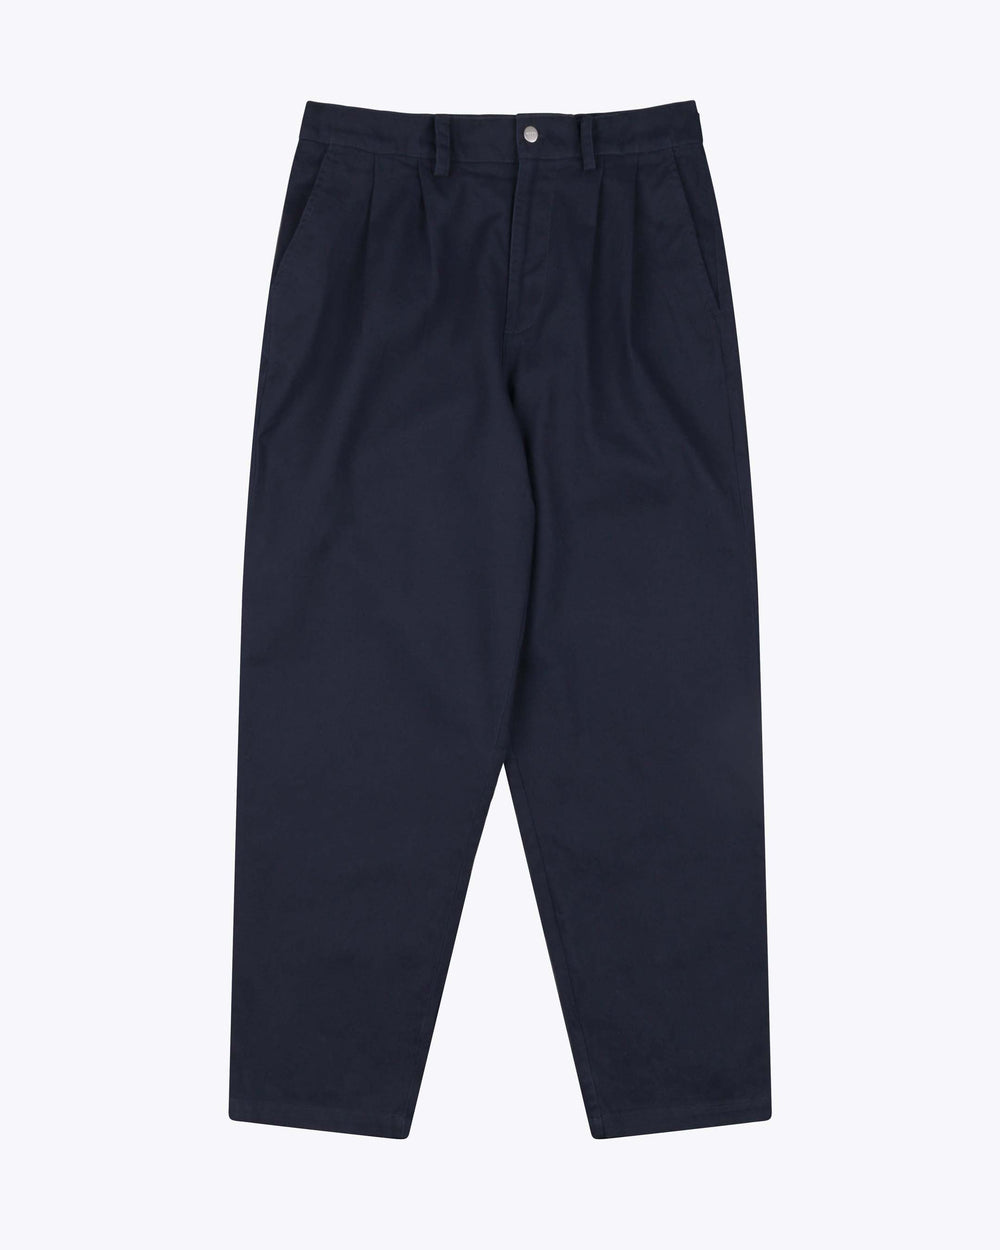 FLETCHER Navy Blue Cotton Twill Pleated Trousers